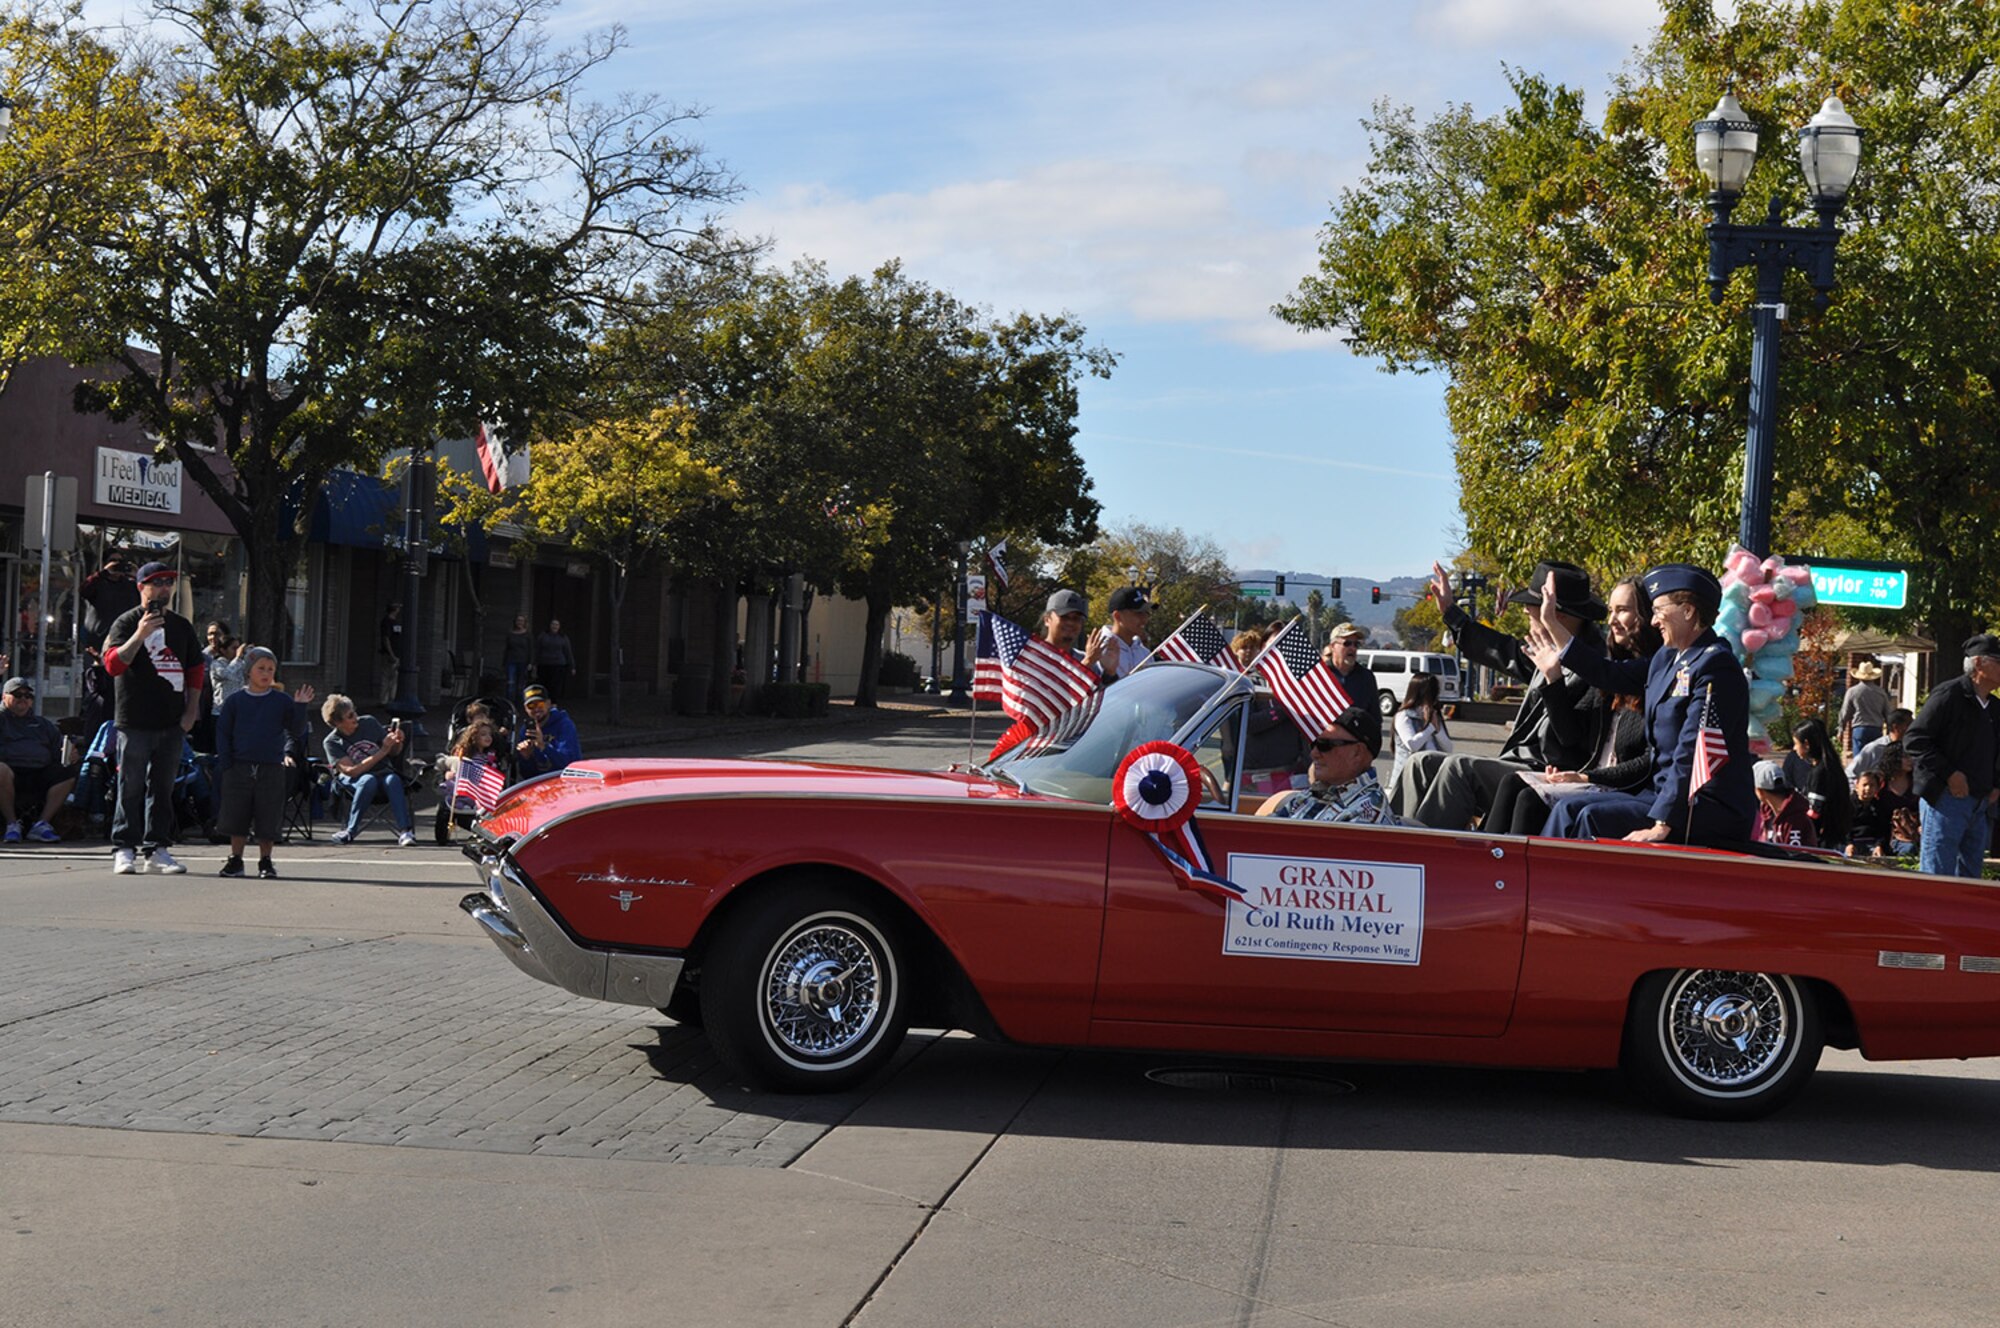 Members of Team Travis came out to support the Fairfield Veterans Day Parade and Commemoration, Saturday November 11, 2017.  Air Force Reserve Col. Ruth Meyer was the grand marshal for this year’s event. The ceremony of remembrance started at 10 a.m. with a musical concert, and the parade started at 12:30 p.m.